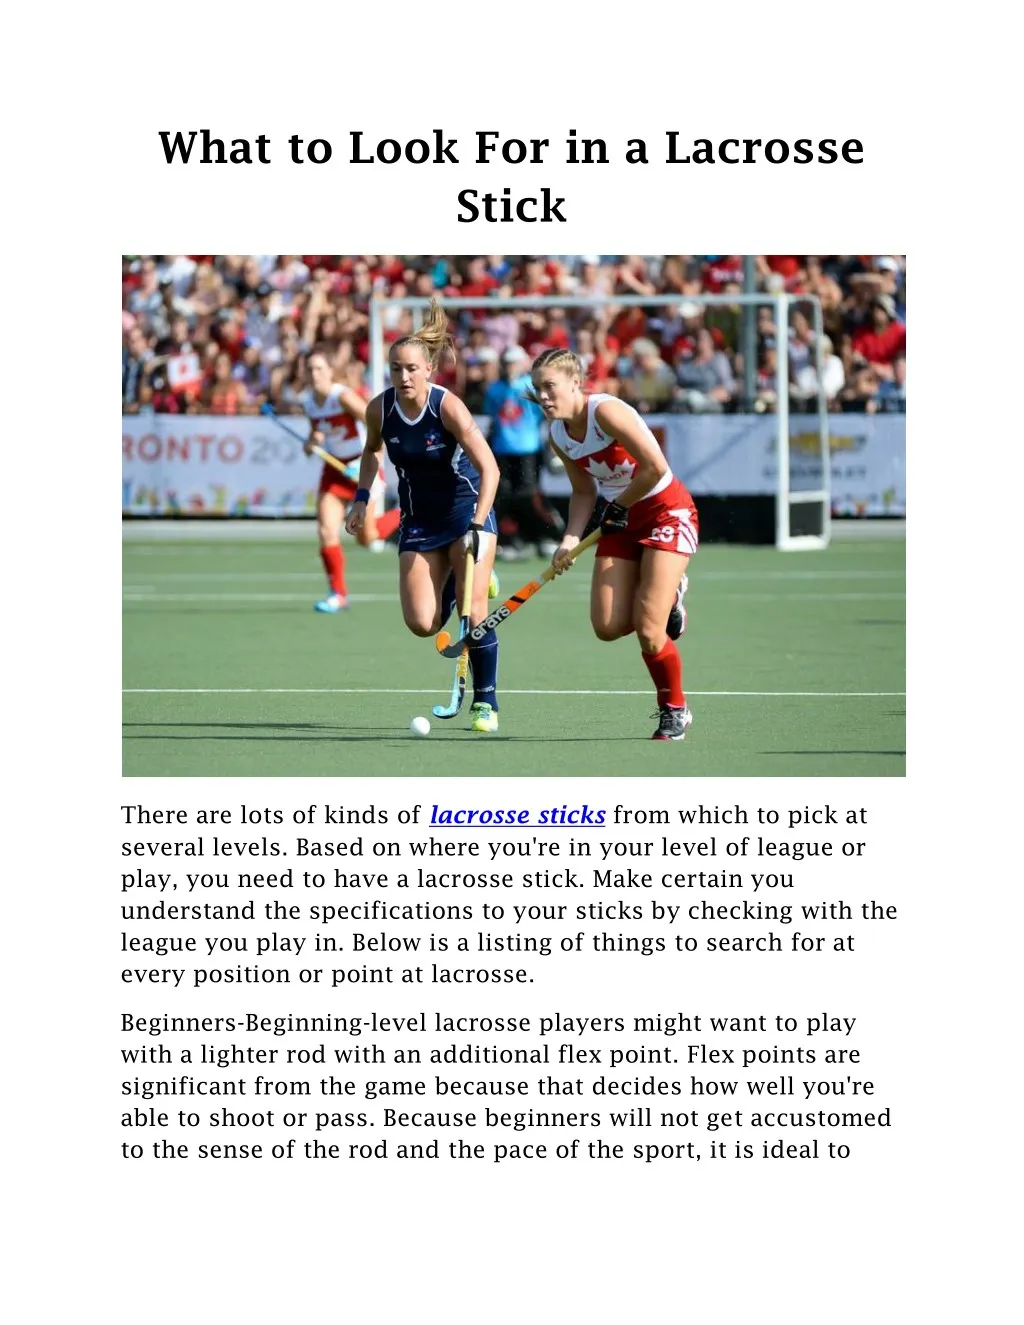 what to look for in a lacrosse stick